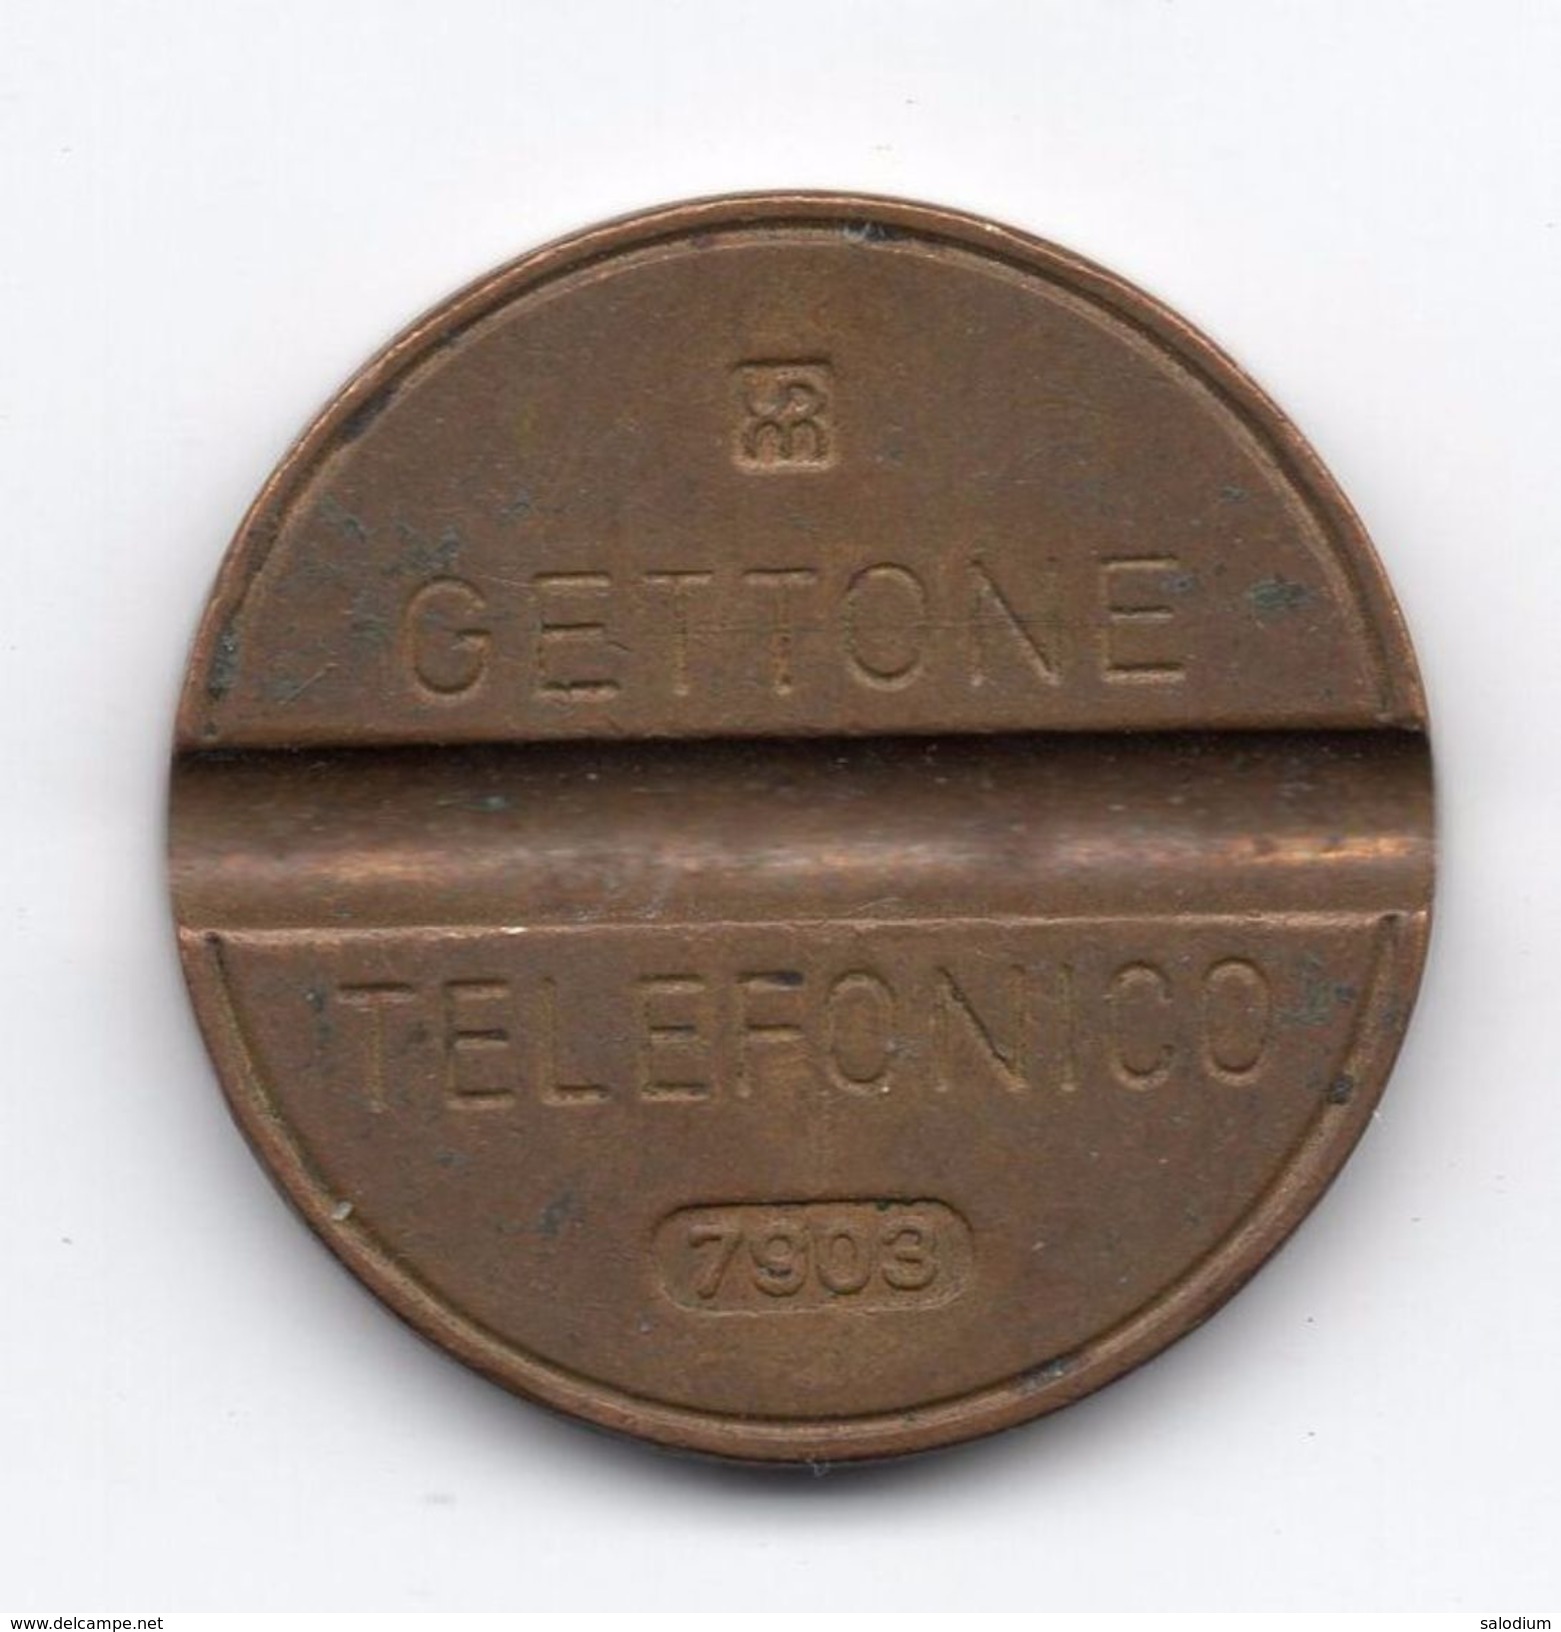 Gettone Telefonico 7903 Token Telephone - (Id-757) - Professionals/Firms